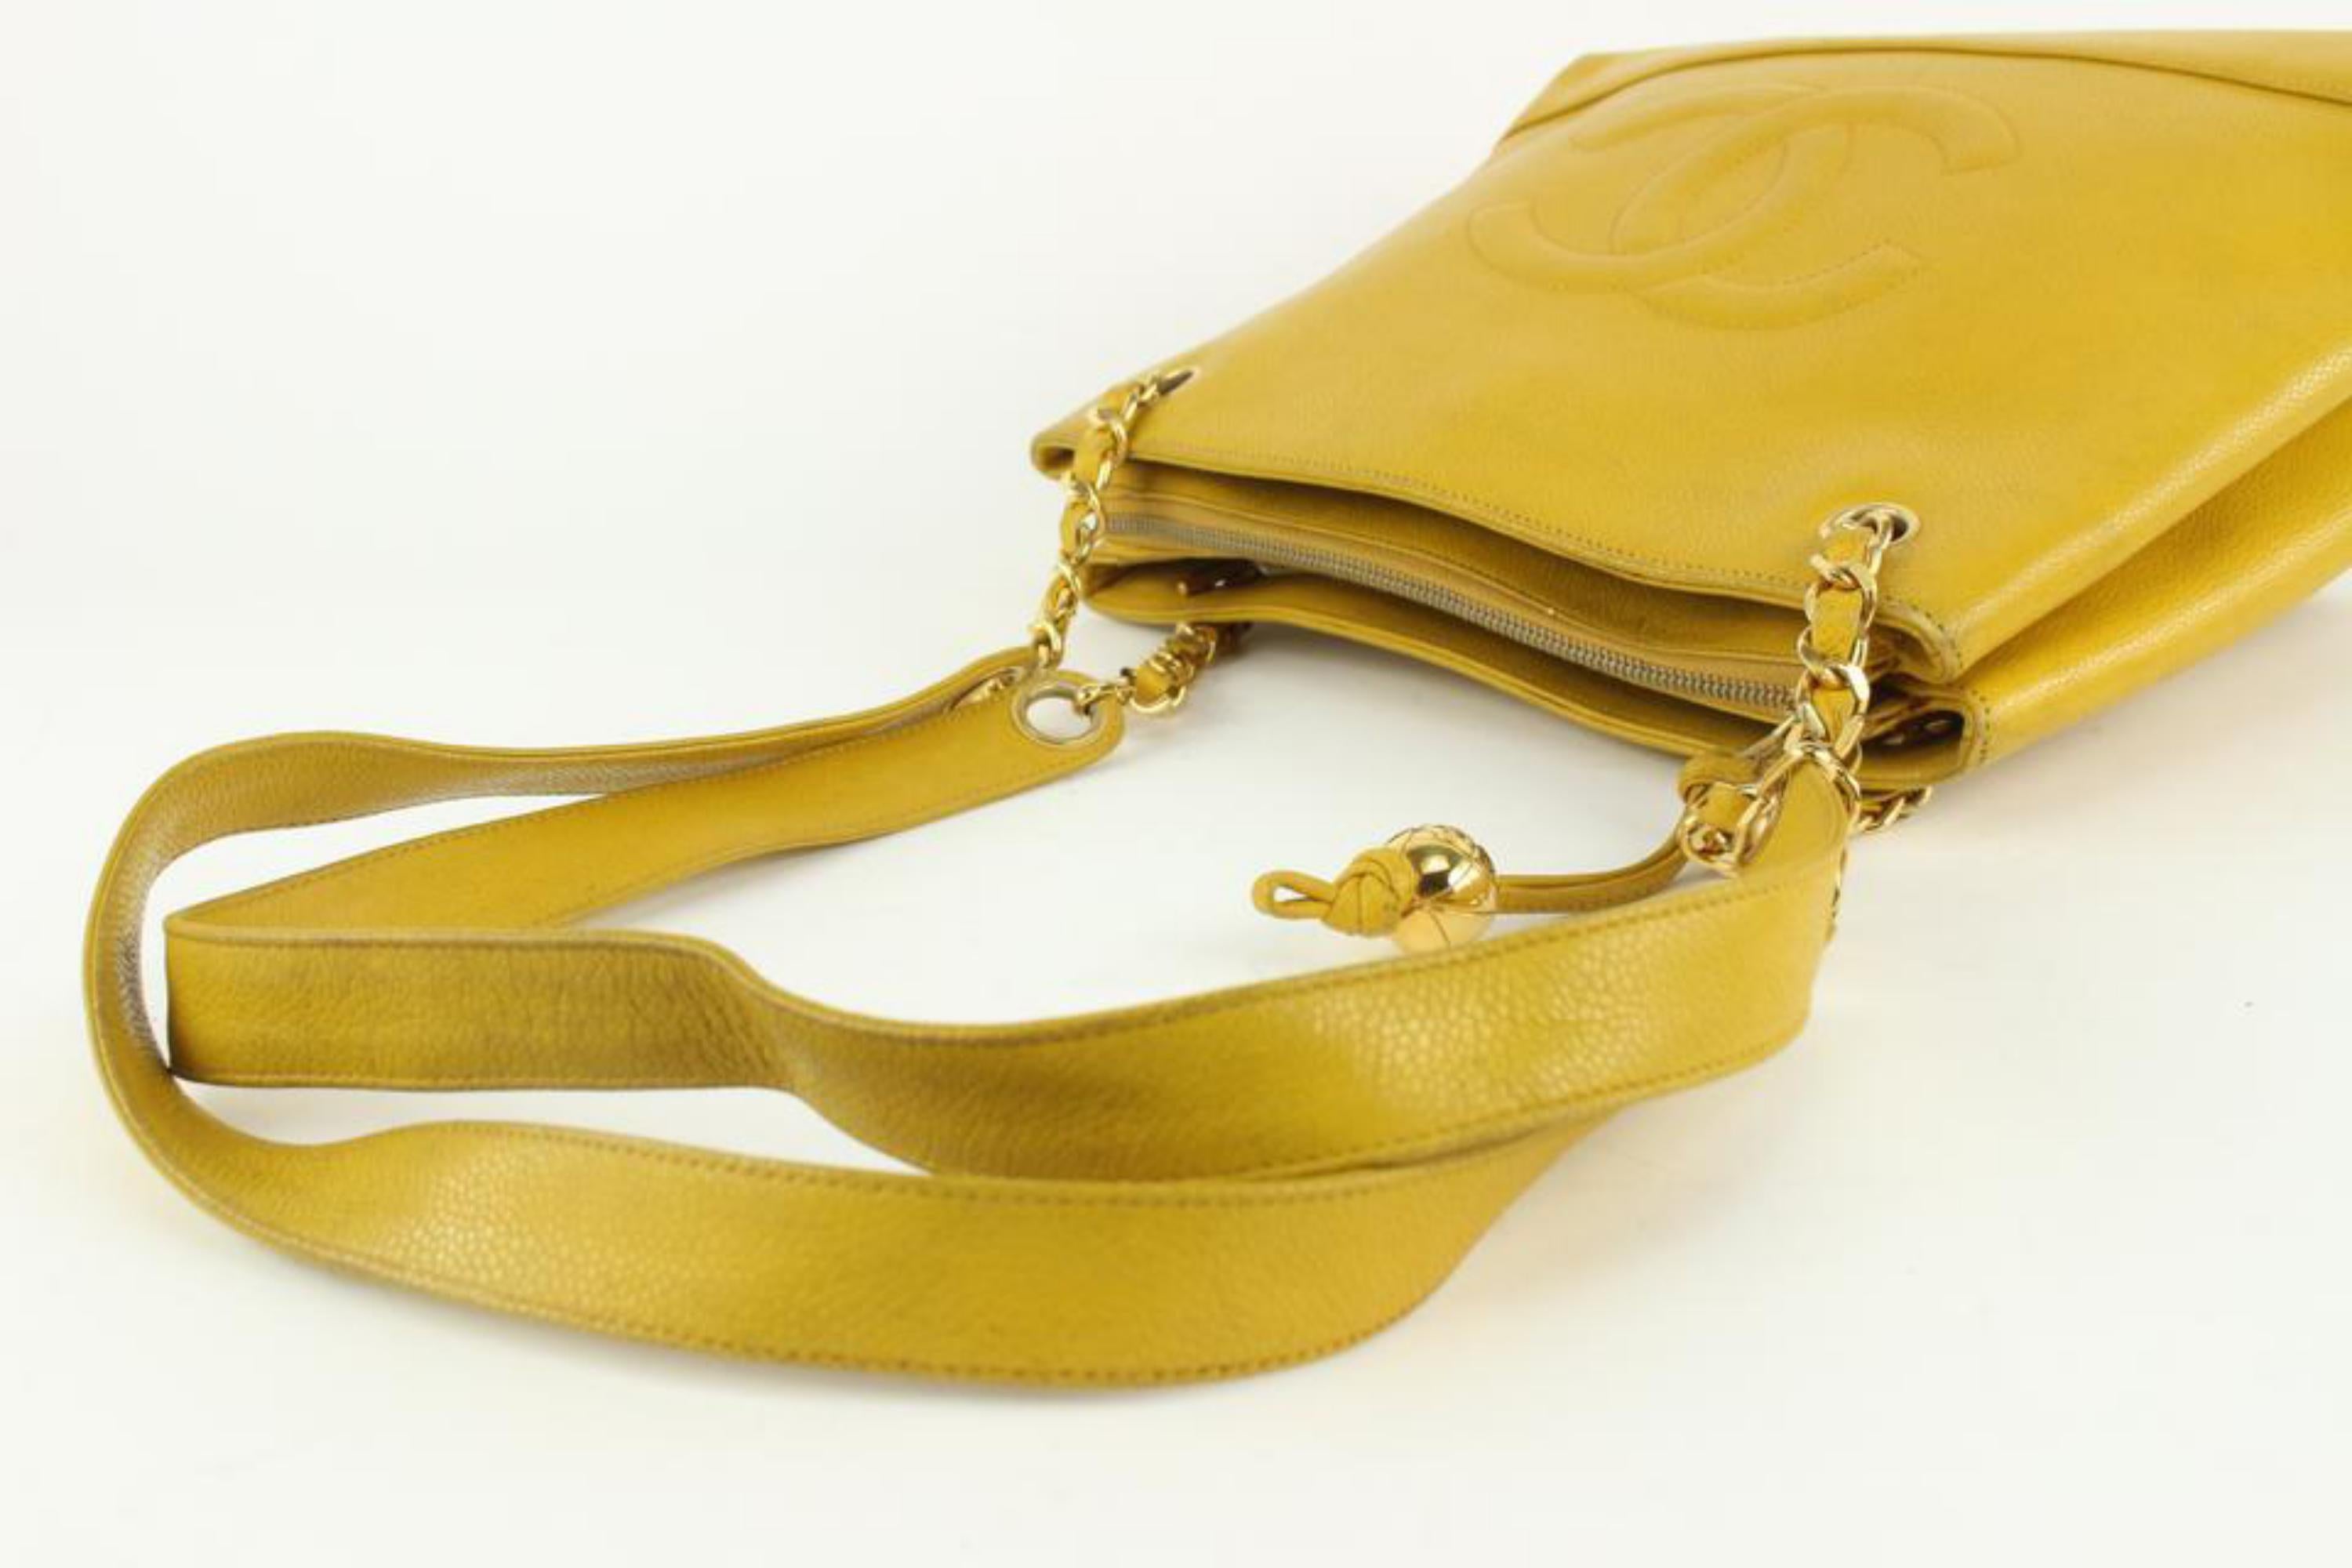 Chanel Mustard Yellow Caviar Leather Timeless CC Chain Tote Bag 1115c5 In Fair Condition In Dix hills, NY